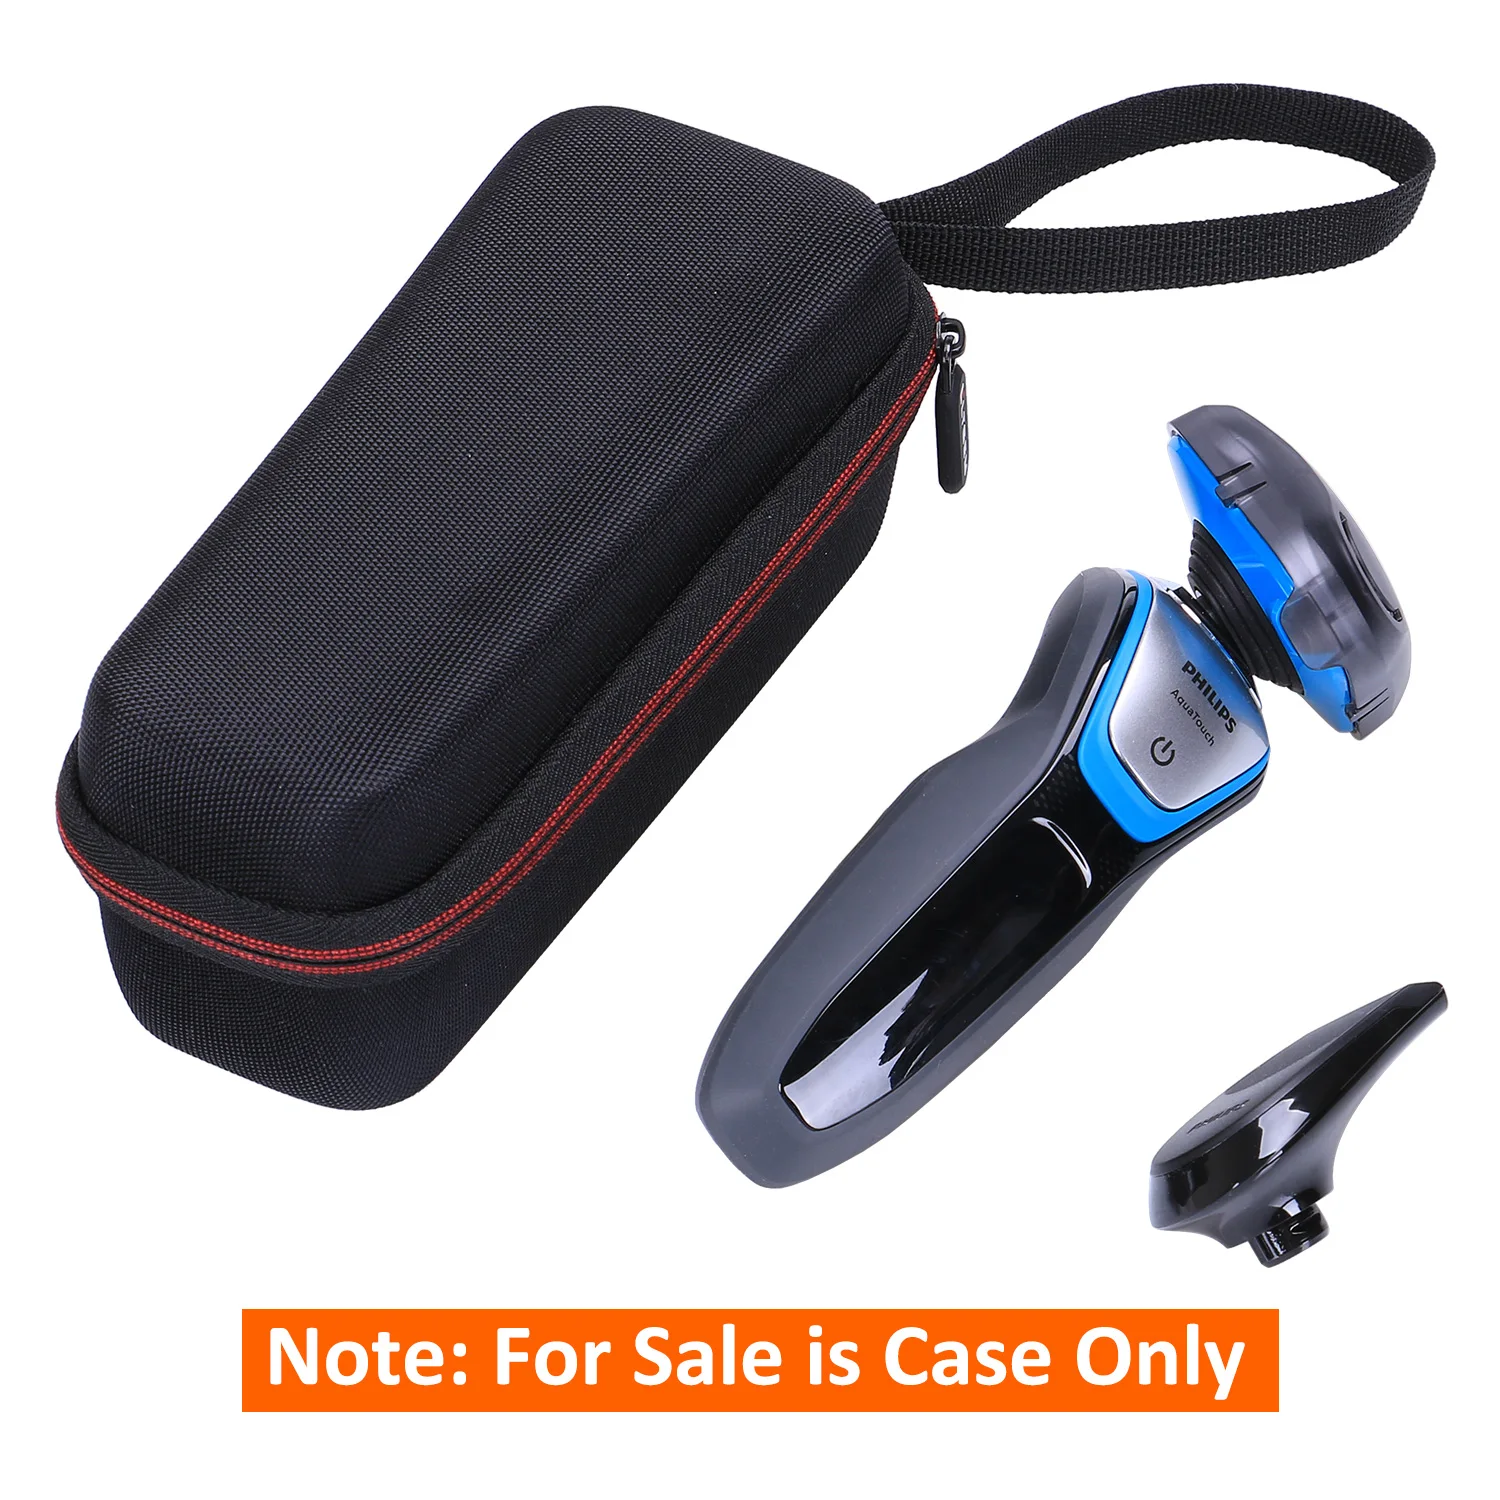 

LTGEM Case for Philips Norelco Electric Men Shaver Series 3500 6800 3100 5500 5100 5300 5700 6880 7100 Wet/Dry Rotary Shaver